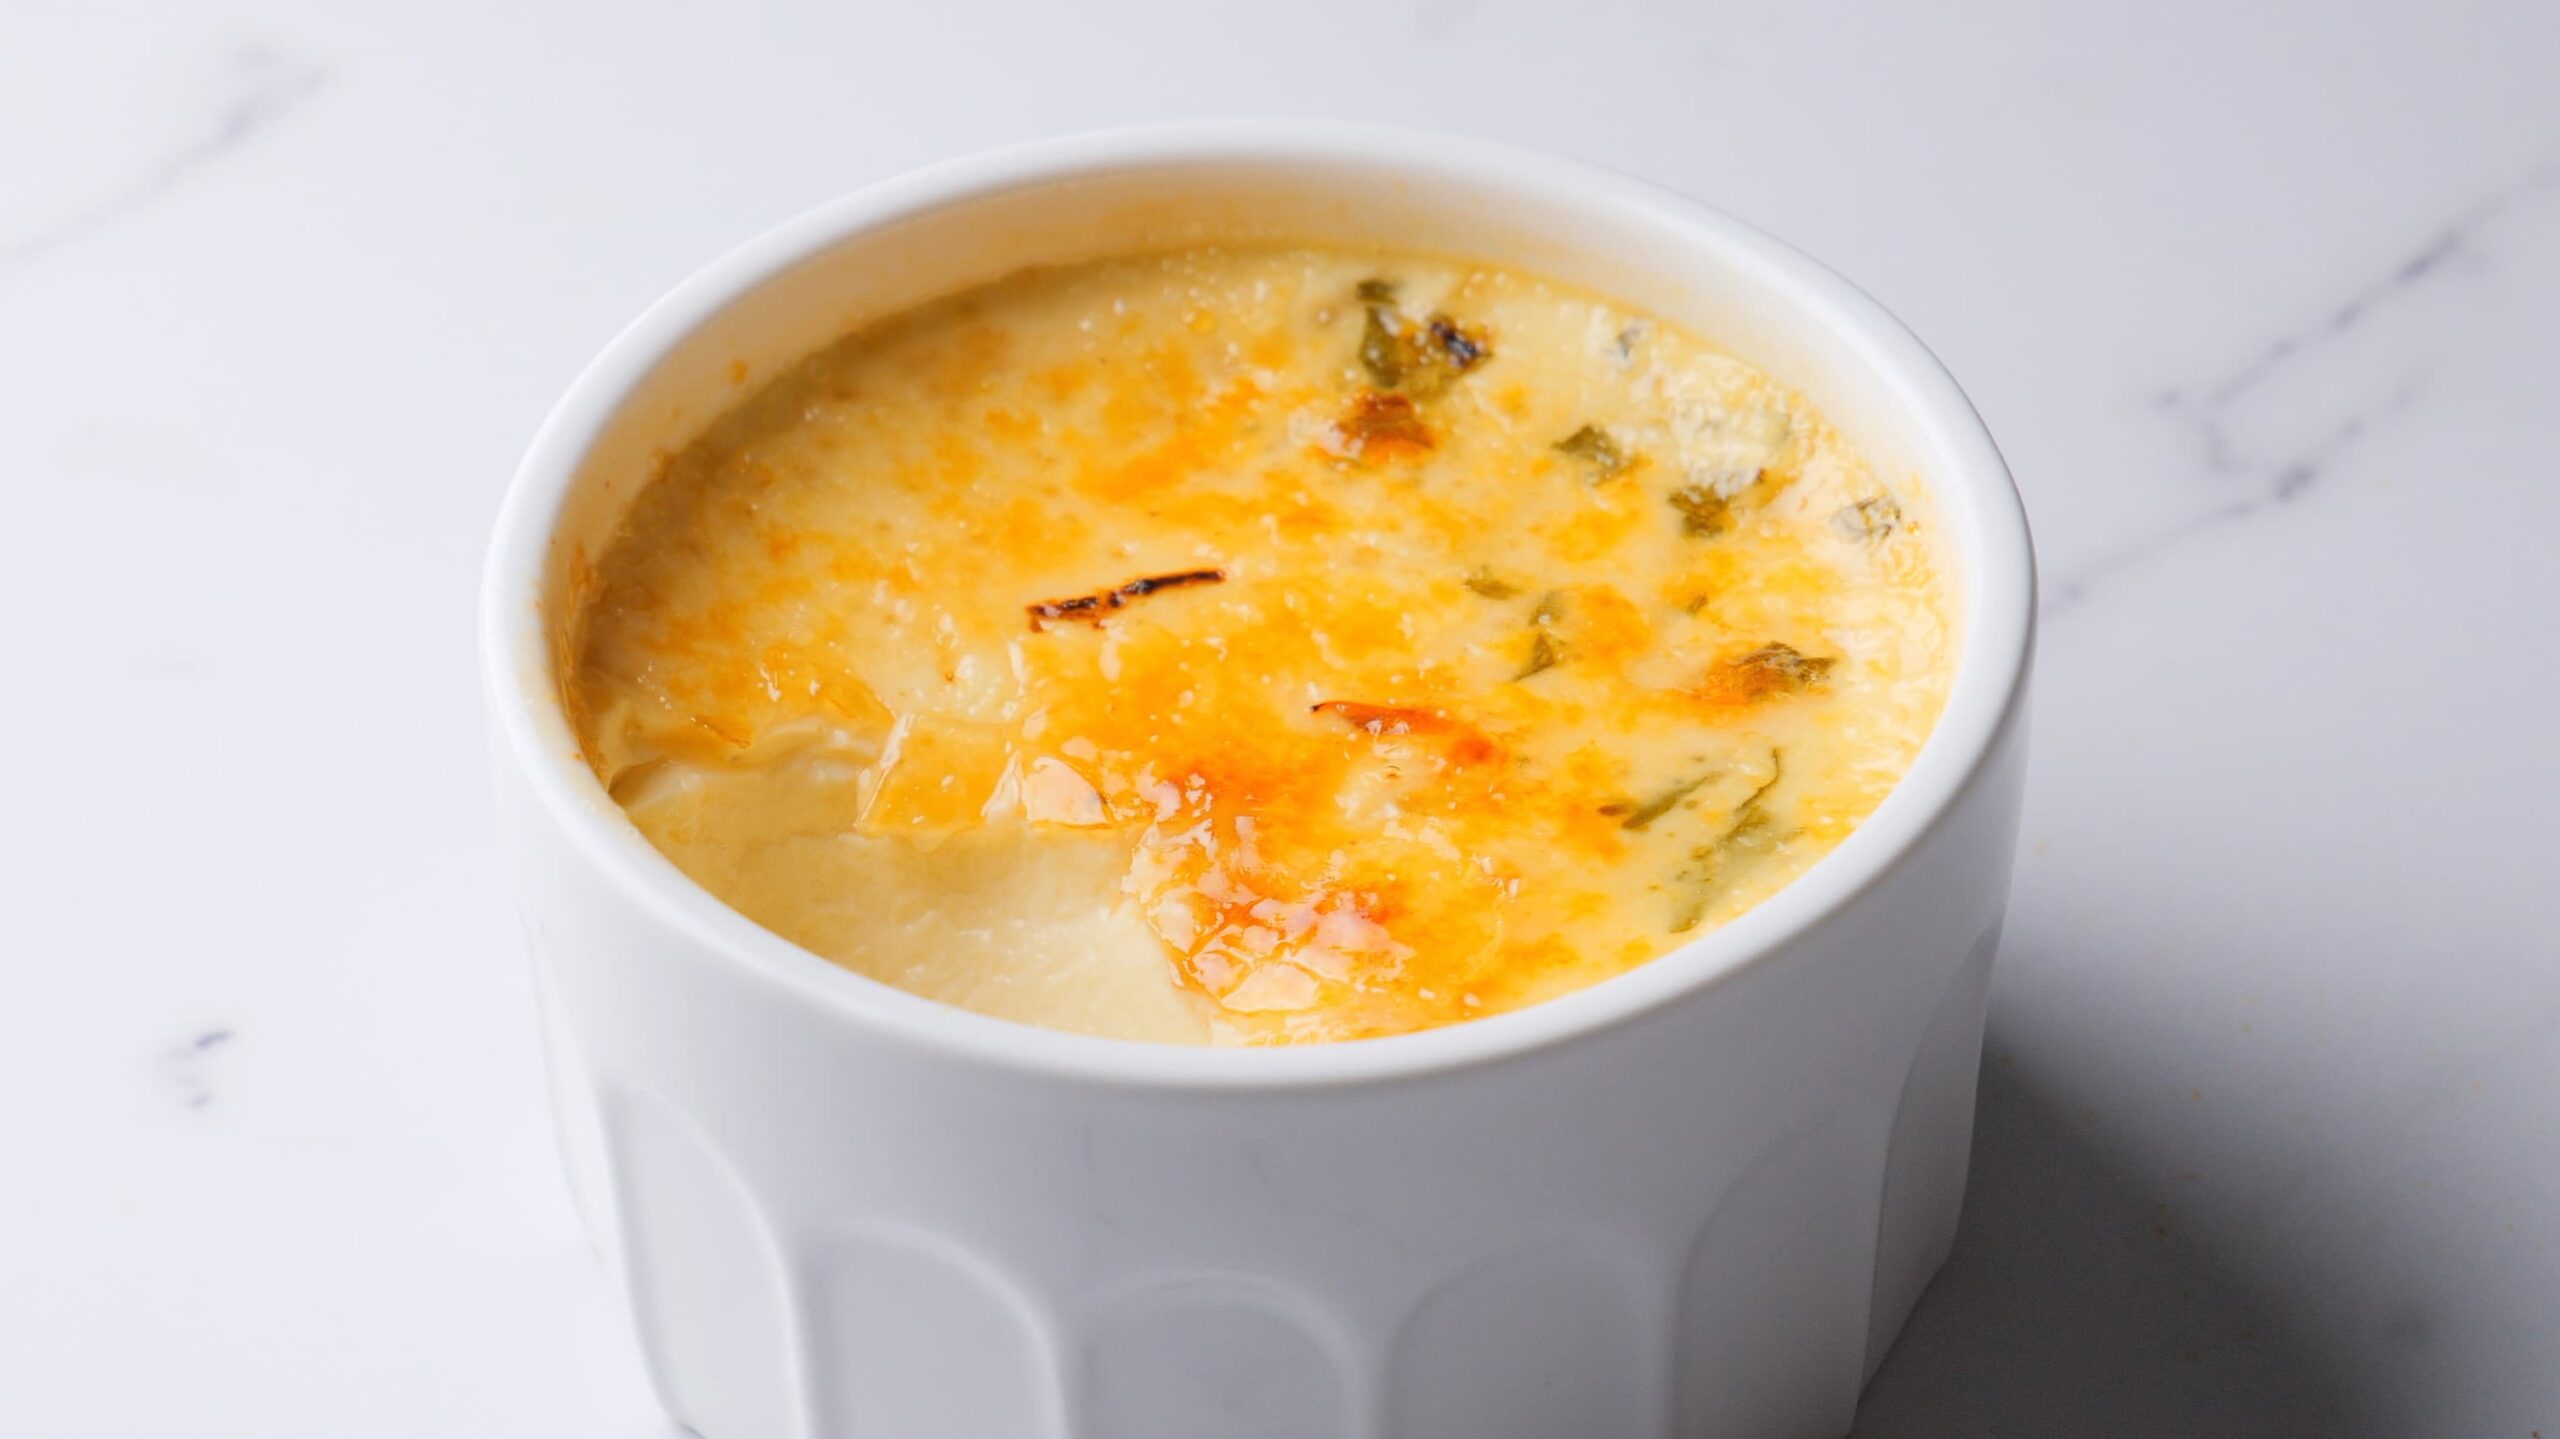 A Savory Crab Brulee Recipe Made with Crab Meat